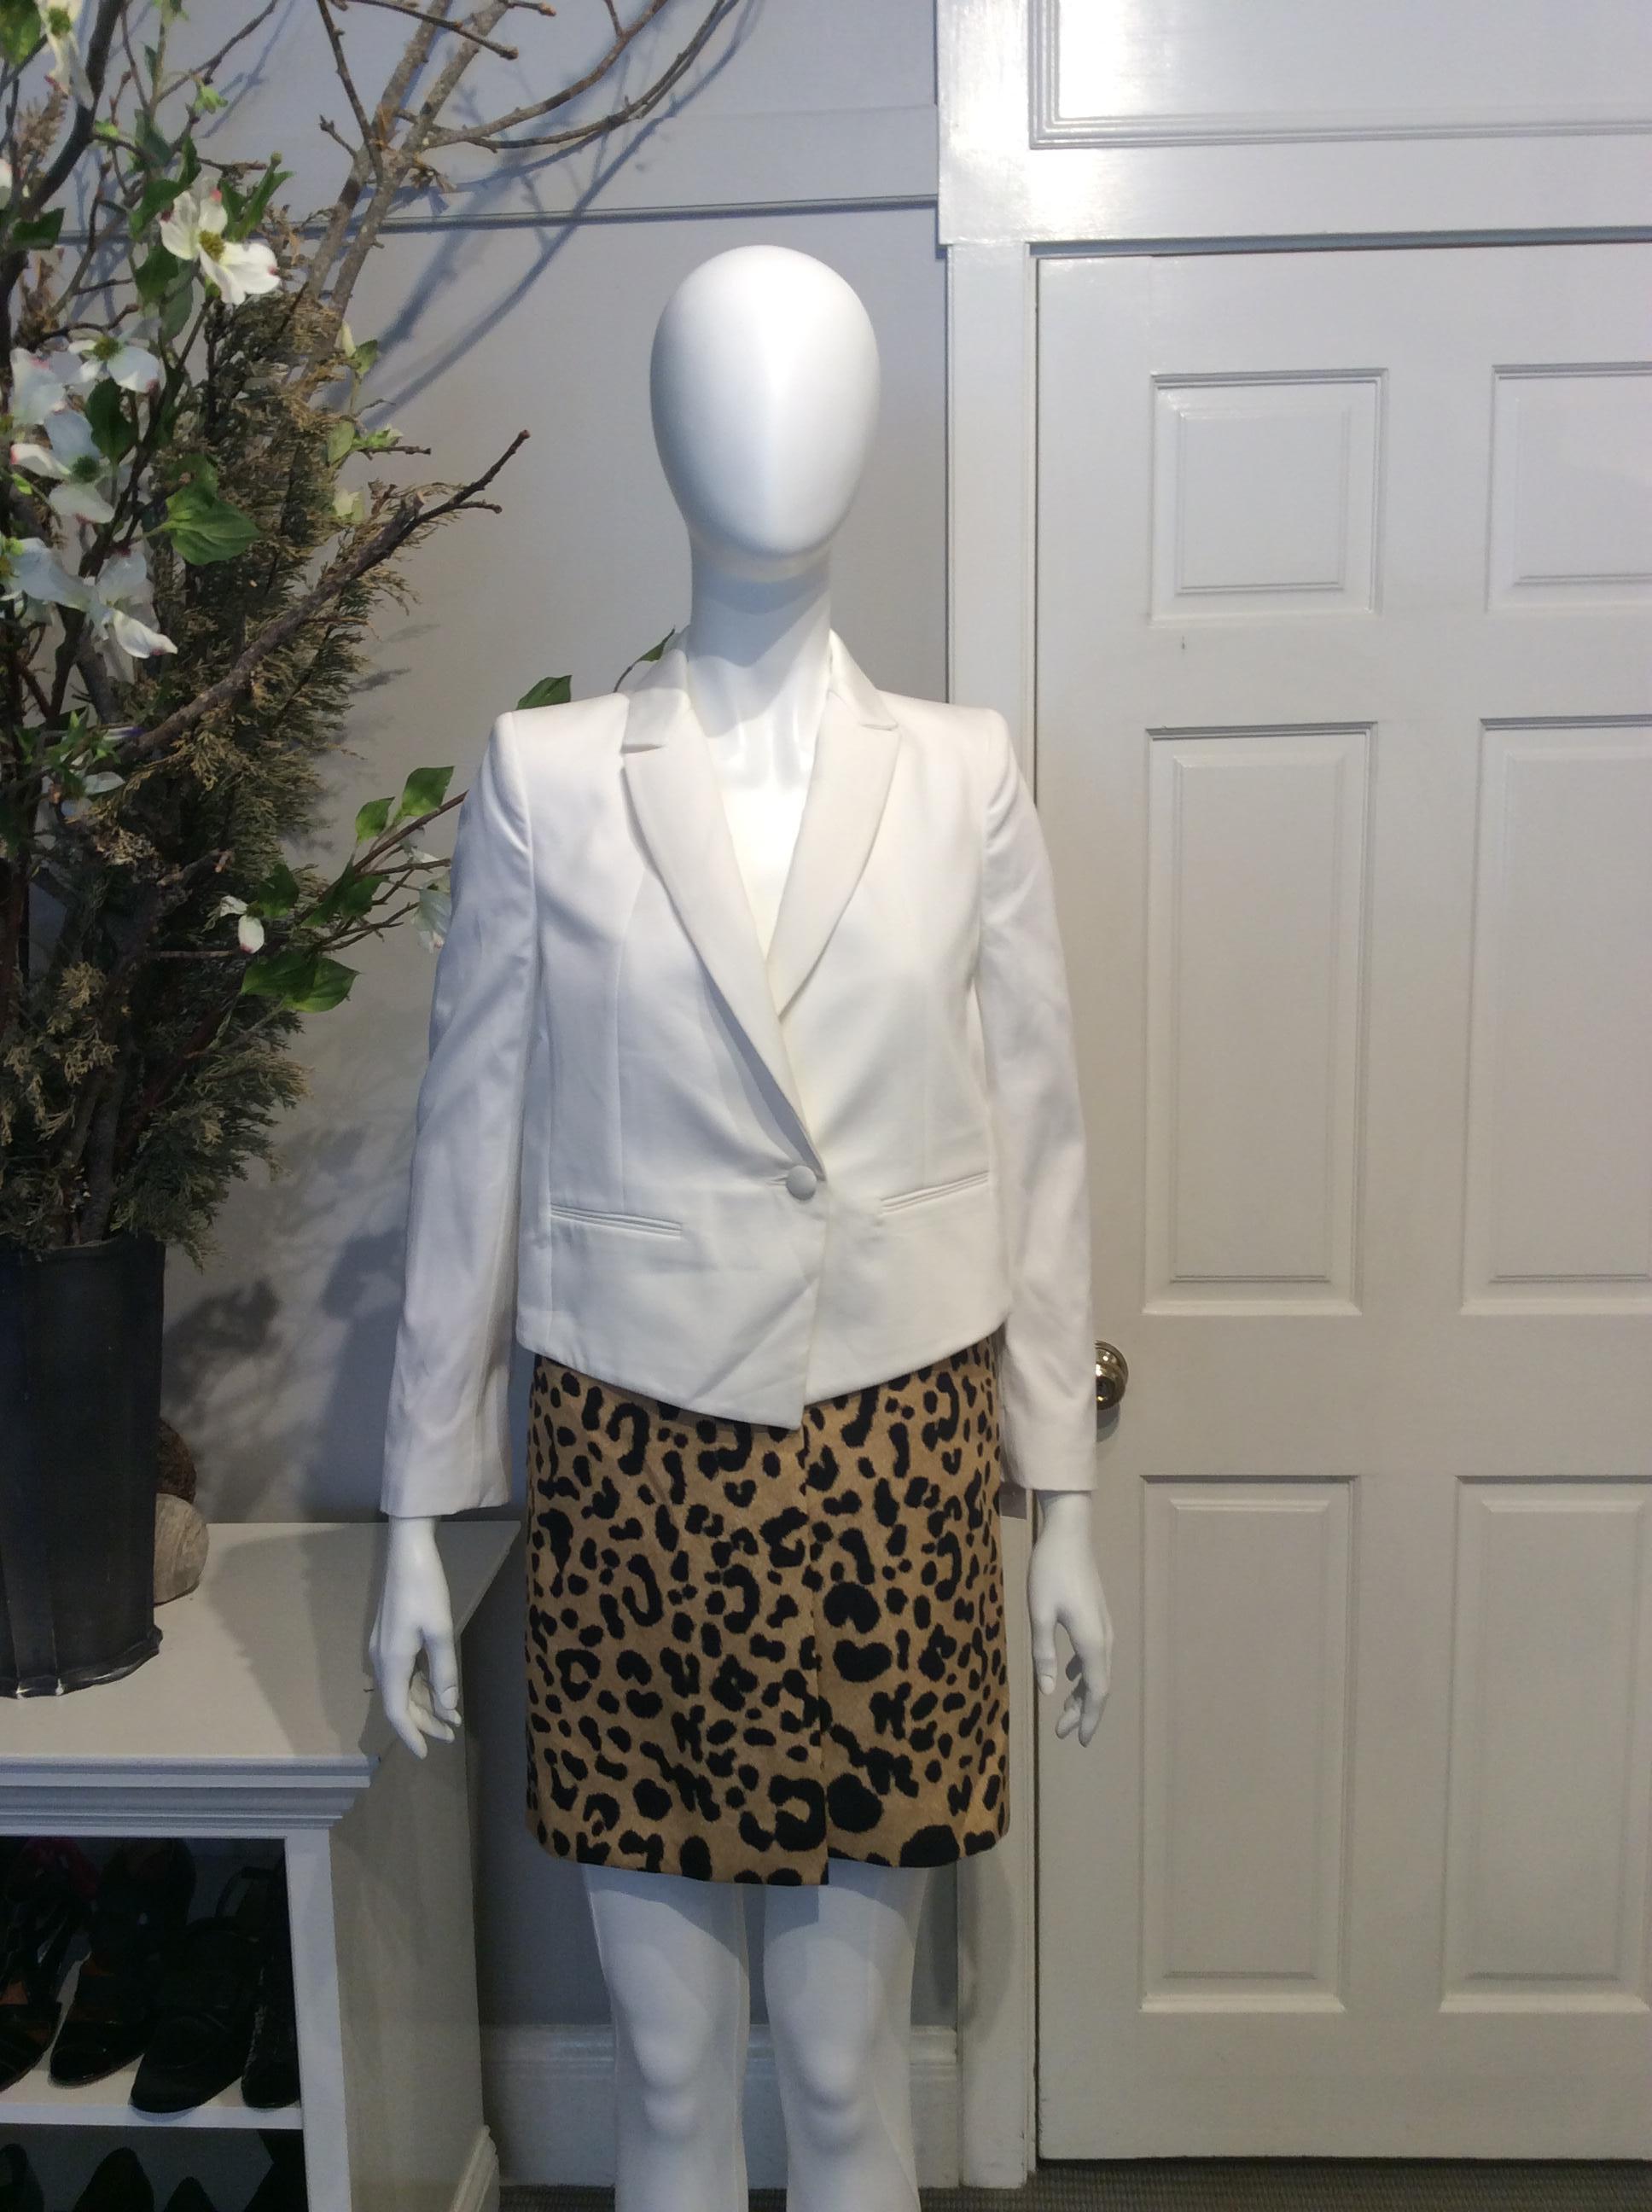 Givenchy white and leopard print knee-length cotton coat. White structured top with paneled vent at back with leopard print skirting at bottom. Single button closer at front. Single button at each cuff. 

Sizing: Fr36, US 4

Fabric content: 100%